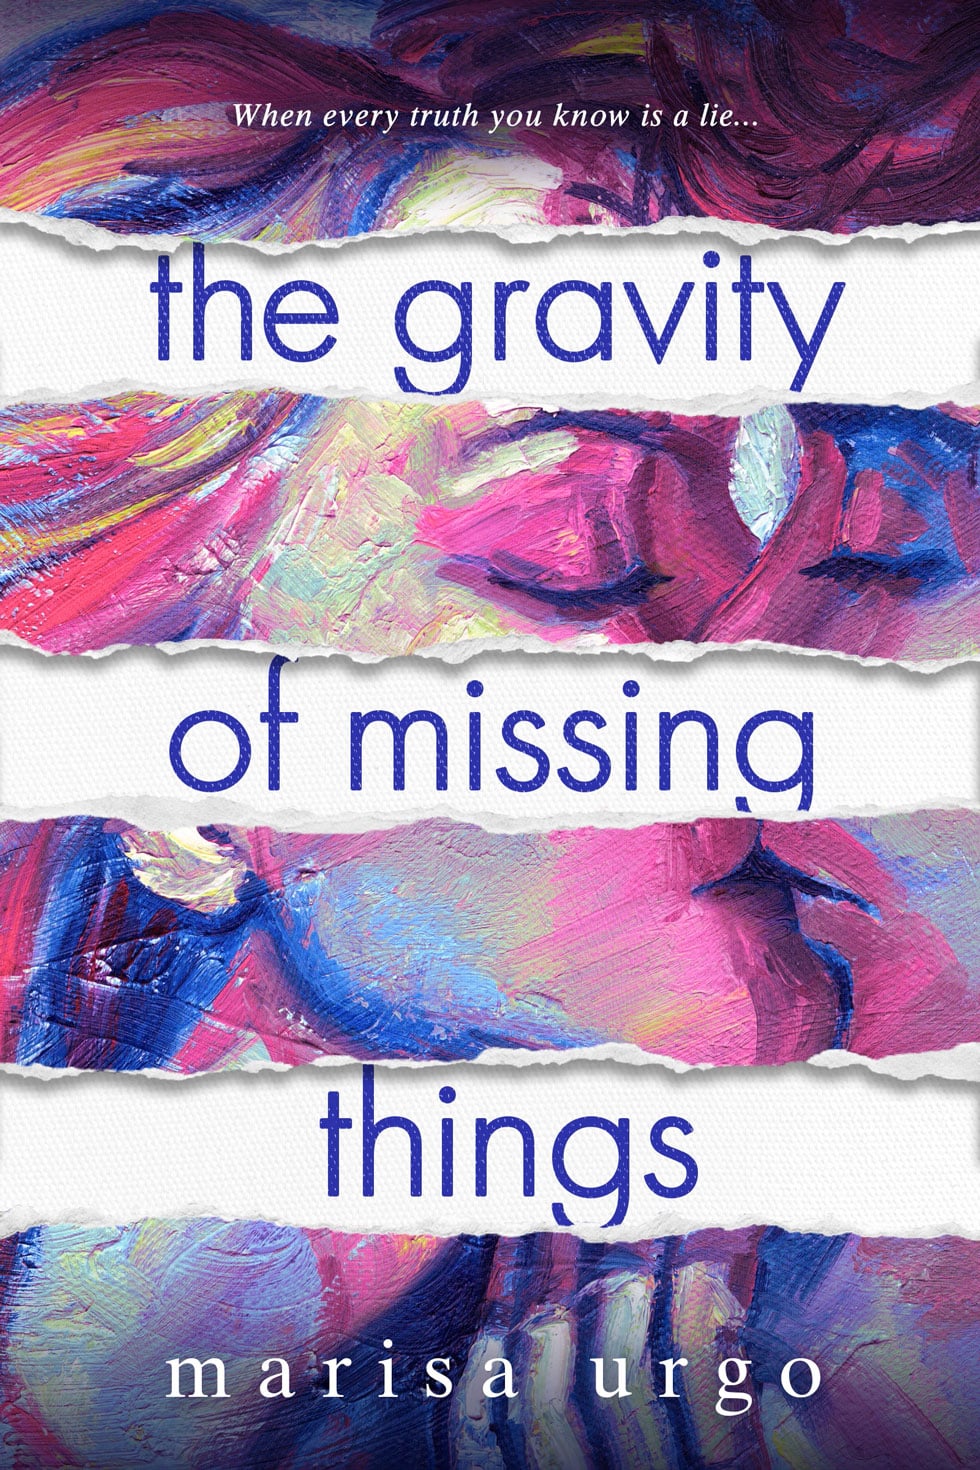 Urgo-THE-GRAVITY-OF-MISSING-THINGS